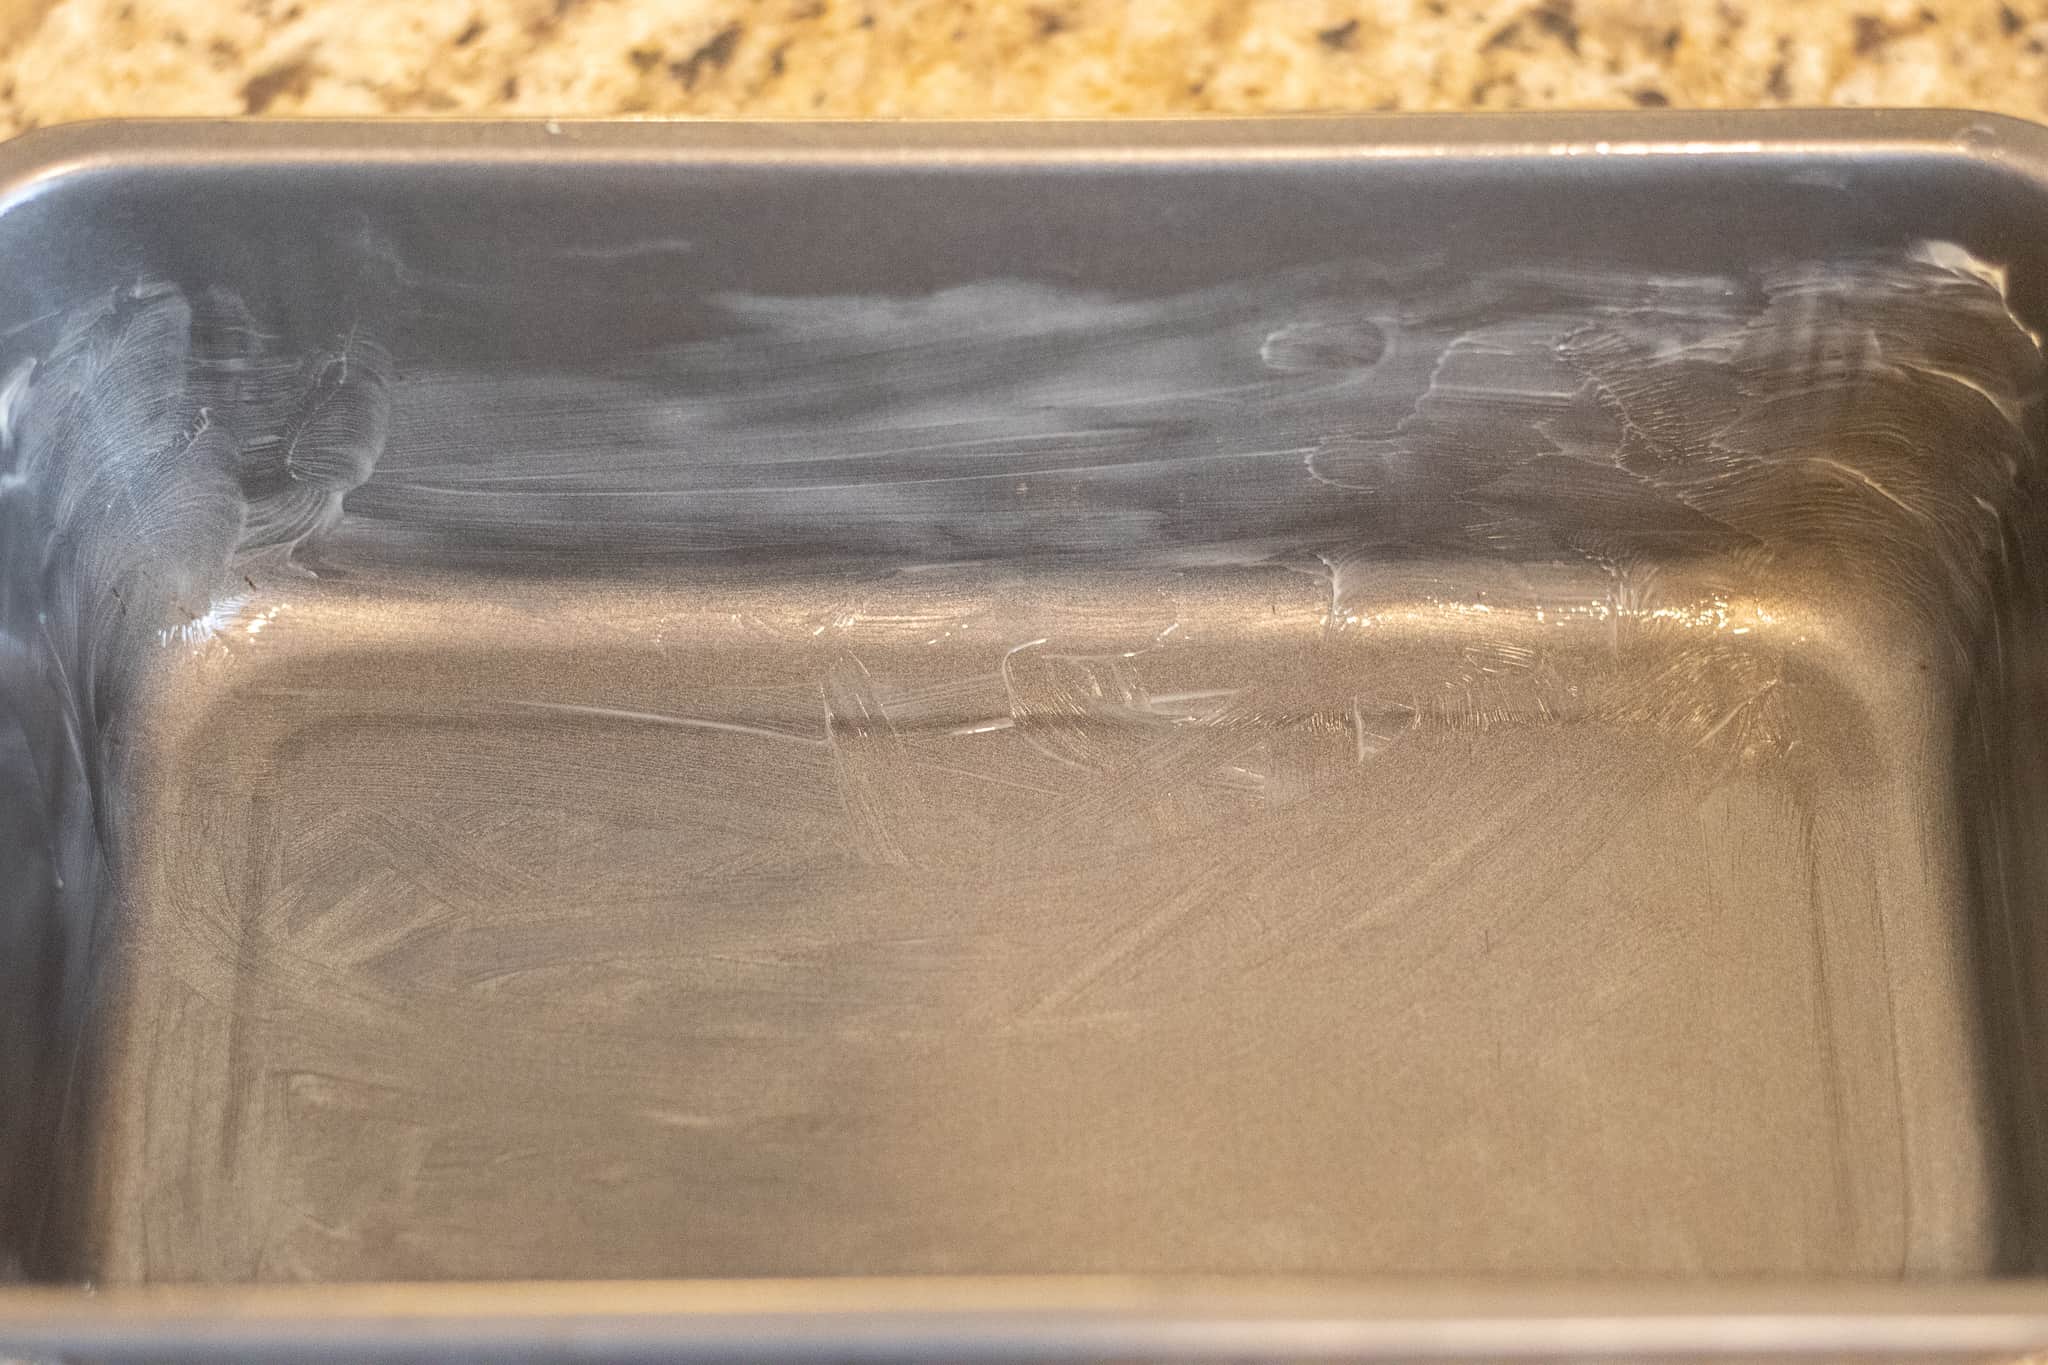 A metal loaf pan greased with a layer of butter.